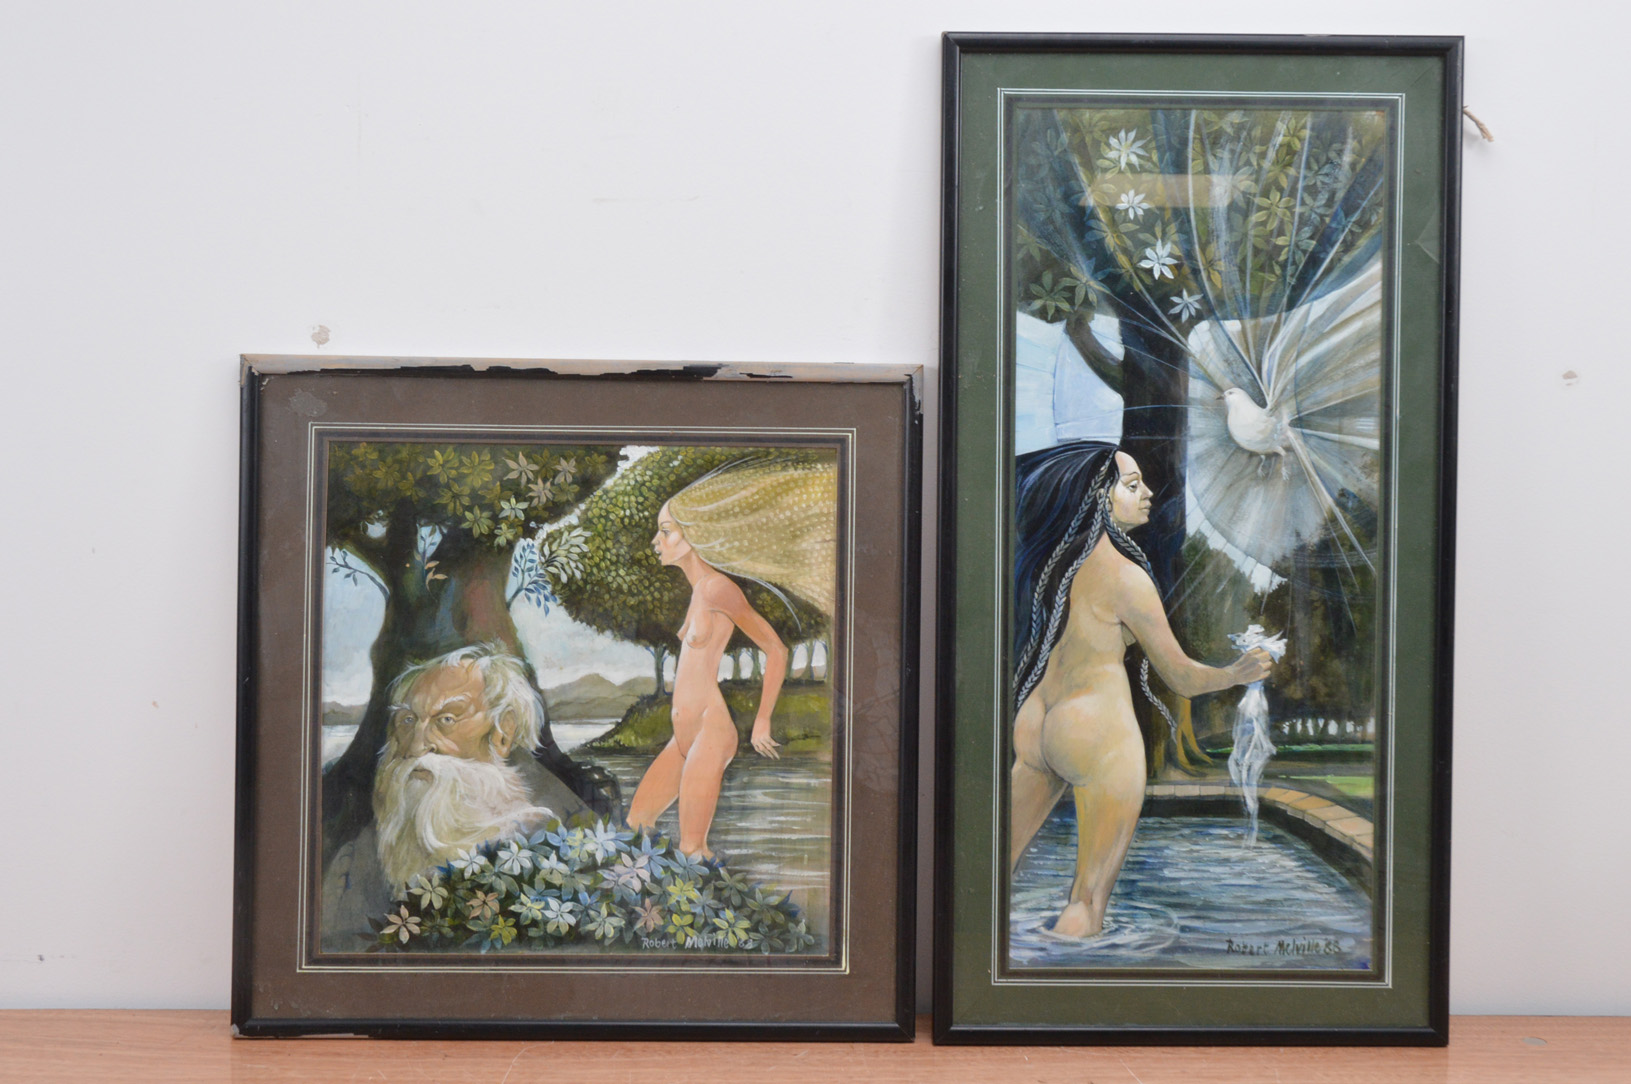 Robert Melville (British 20th century, two works, both of nude ladies, gouache, both signed bottom